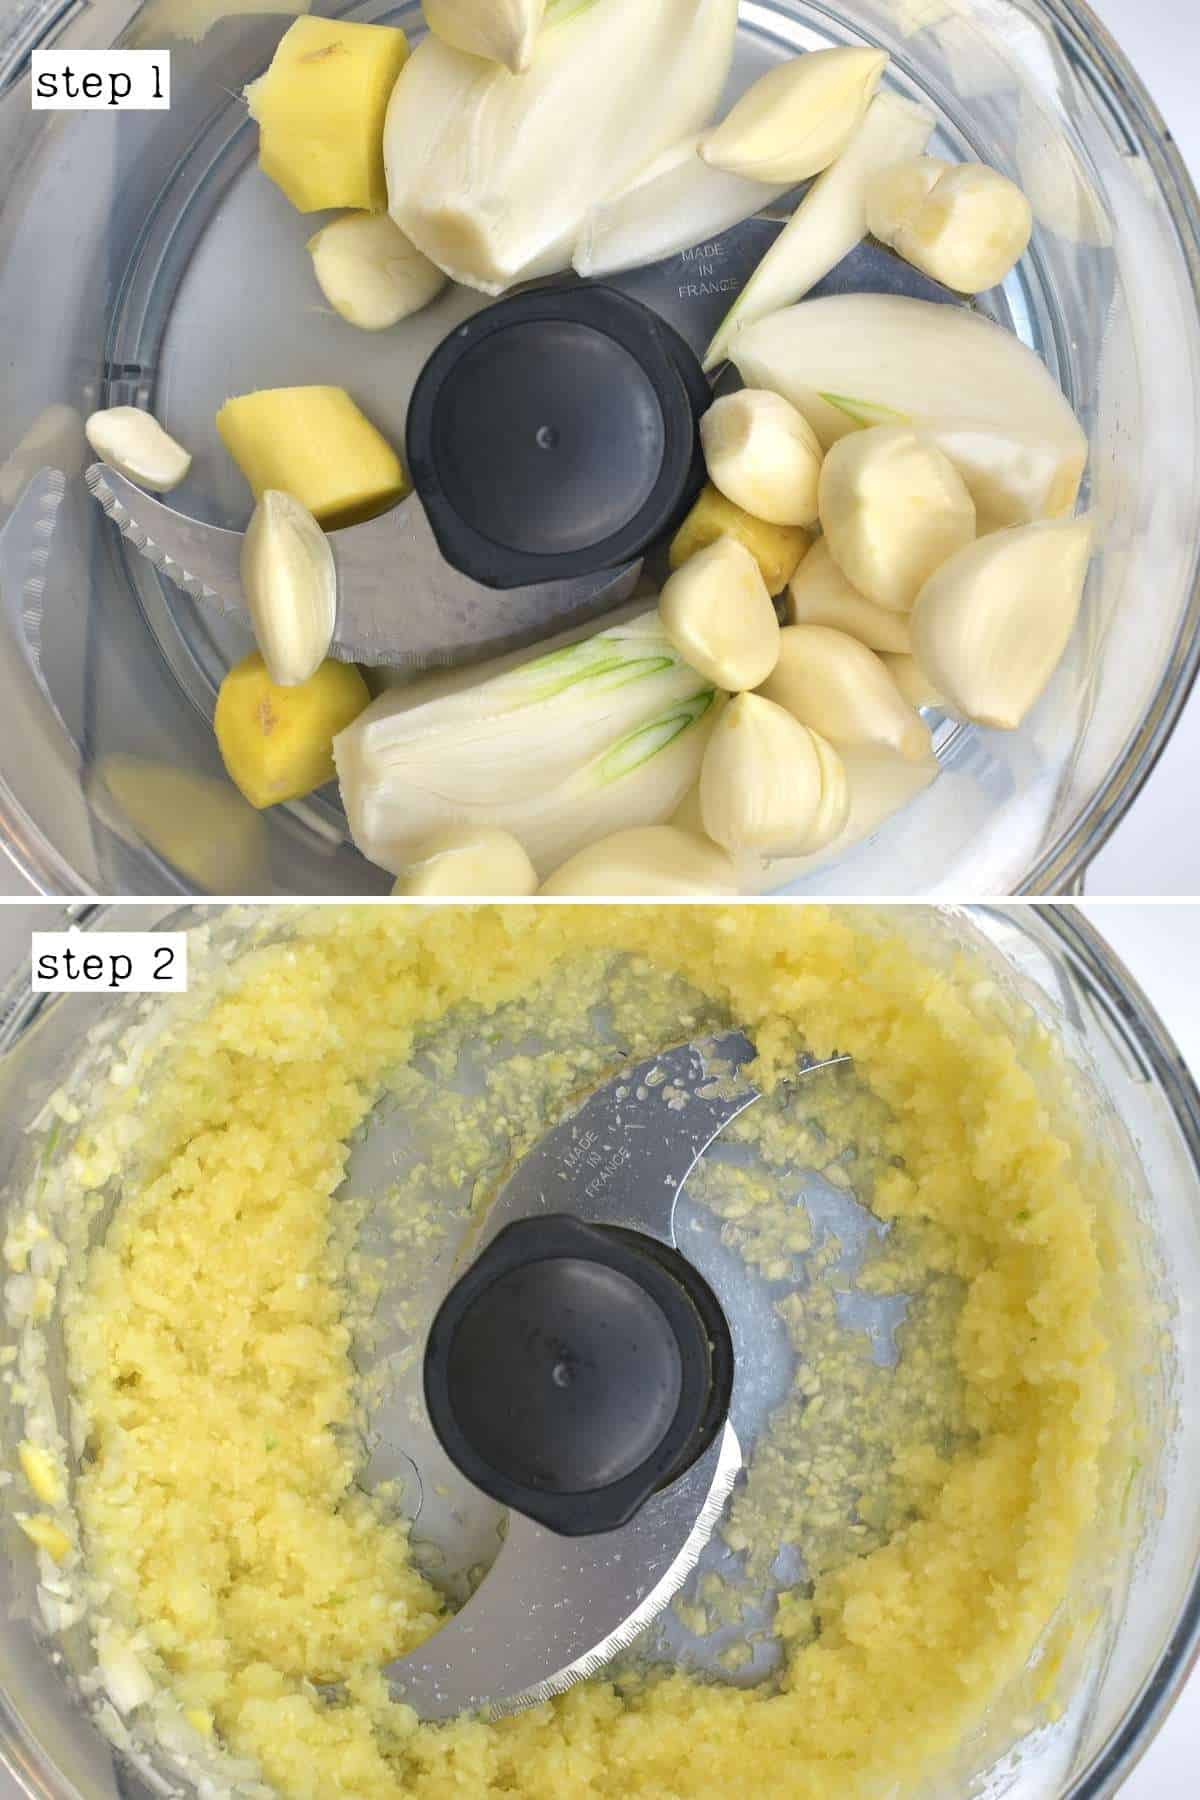 Steps for processing garlic and onion